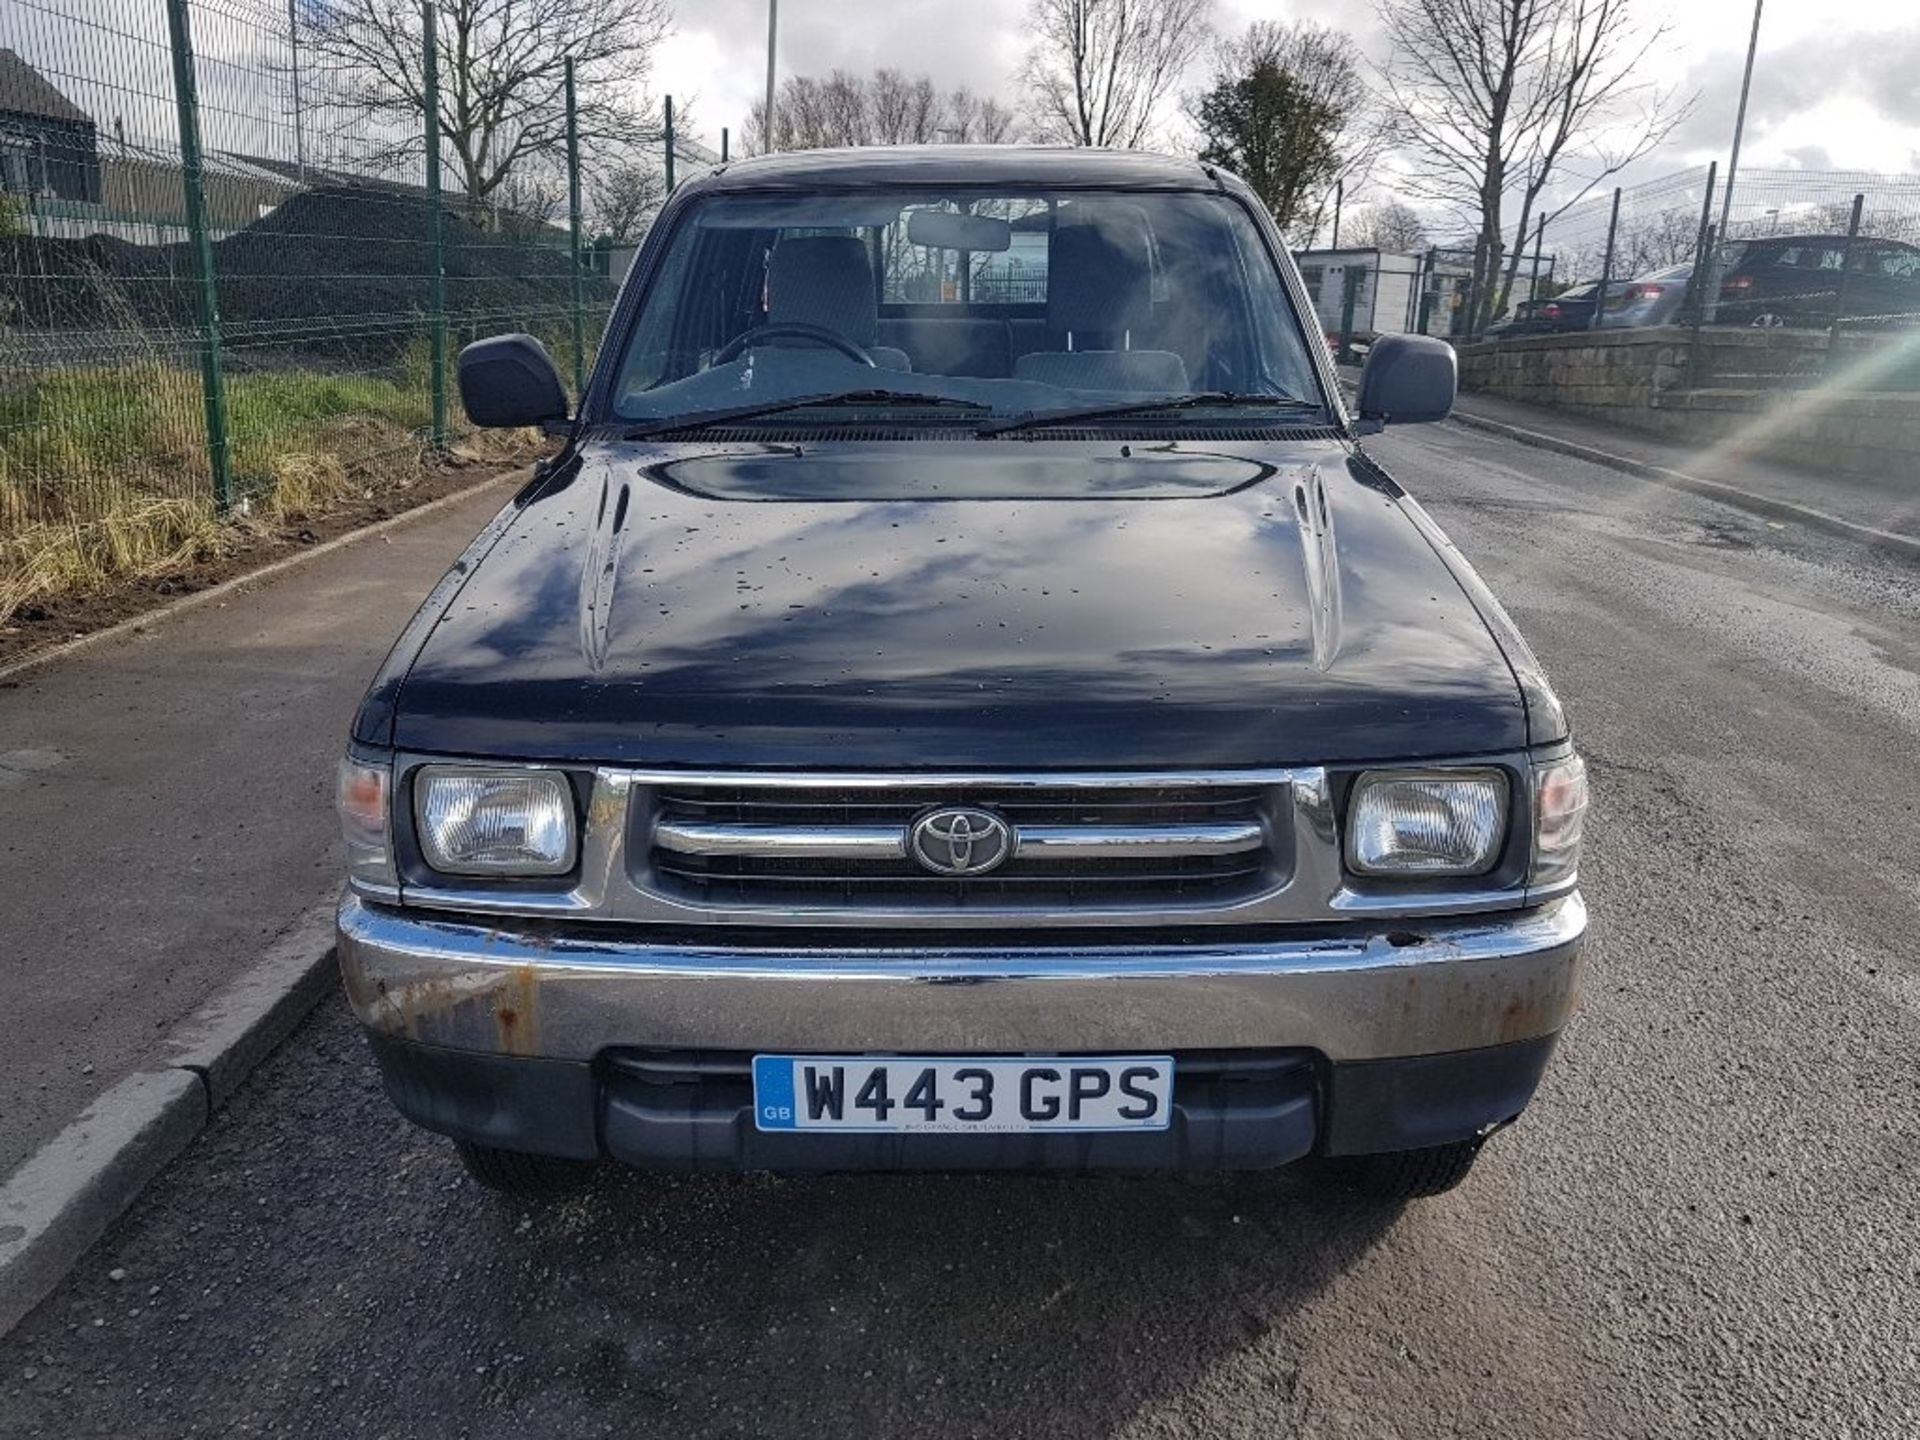 TOYOTA, HILUX 2.4 EX 4X4, W443 GPS, FIRST DATE OF REGISTRATION 02/08/2000, 2.4 LITRE TD, DIESEL, - Image 14 of 14